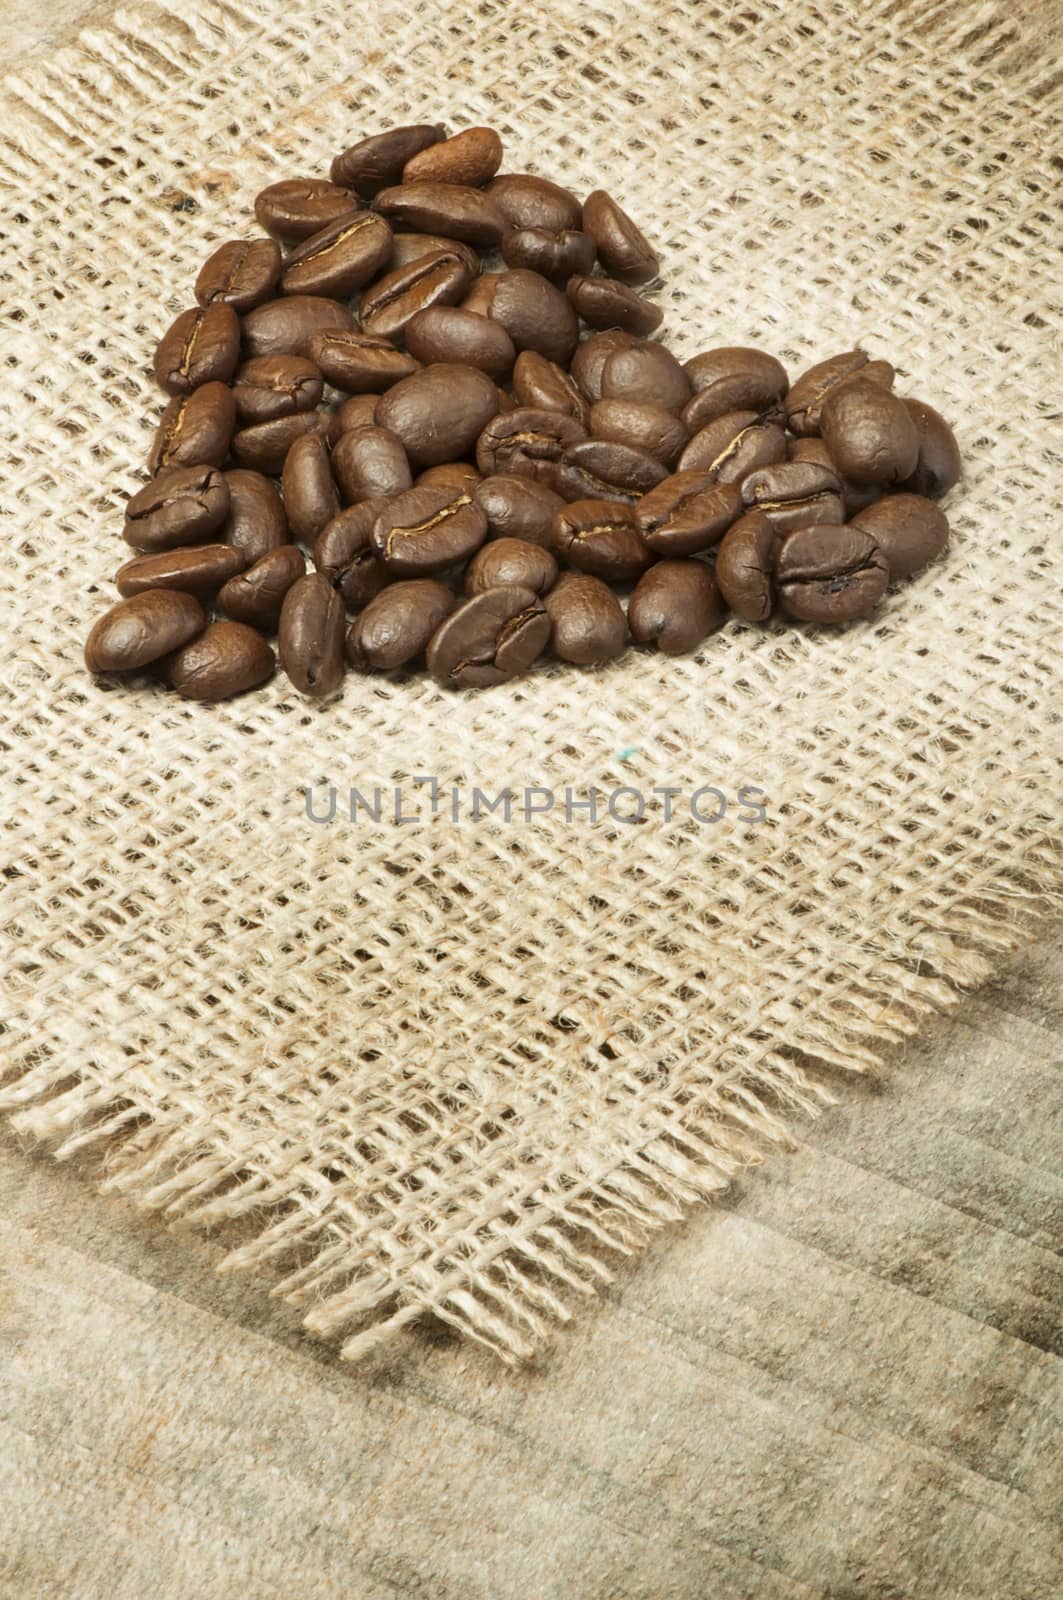 Heart made ​​of coffee beans on burlap